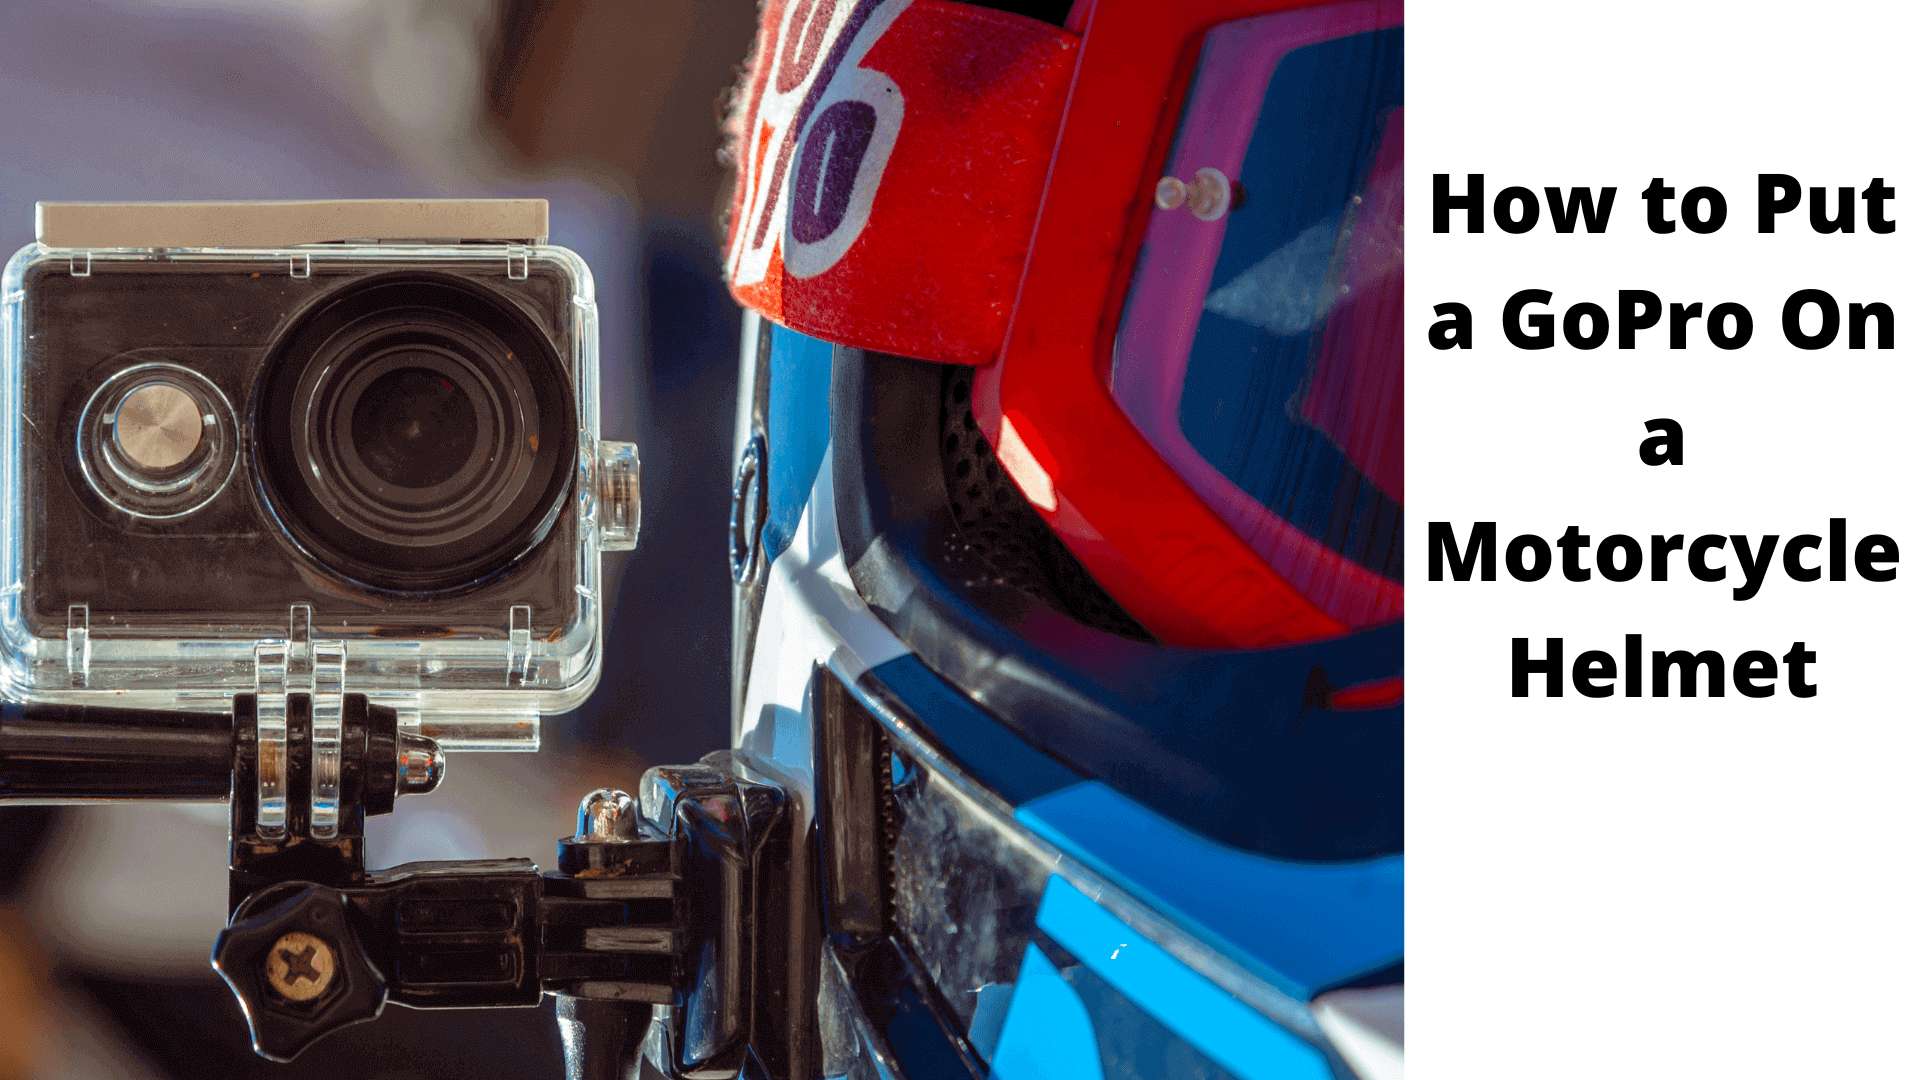 How to Put a GoPro On a Motorcycle Helmet